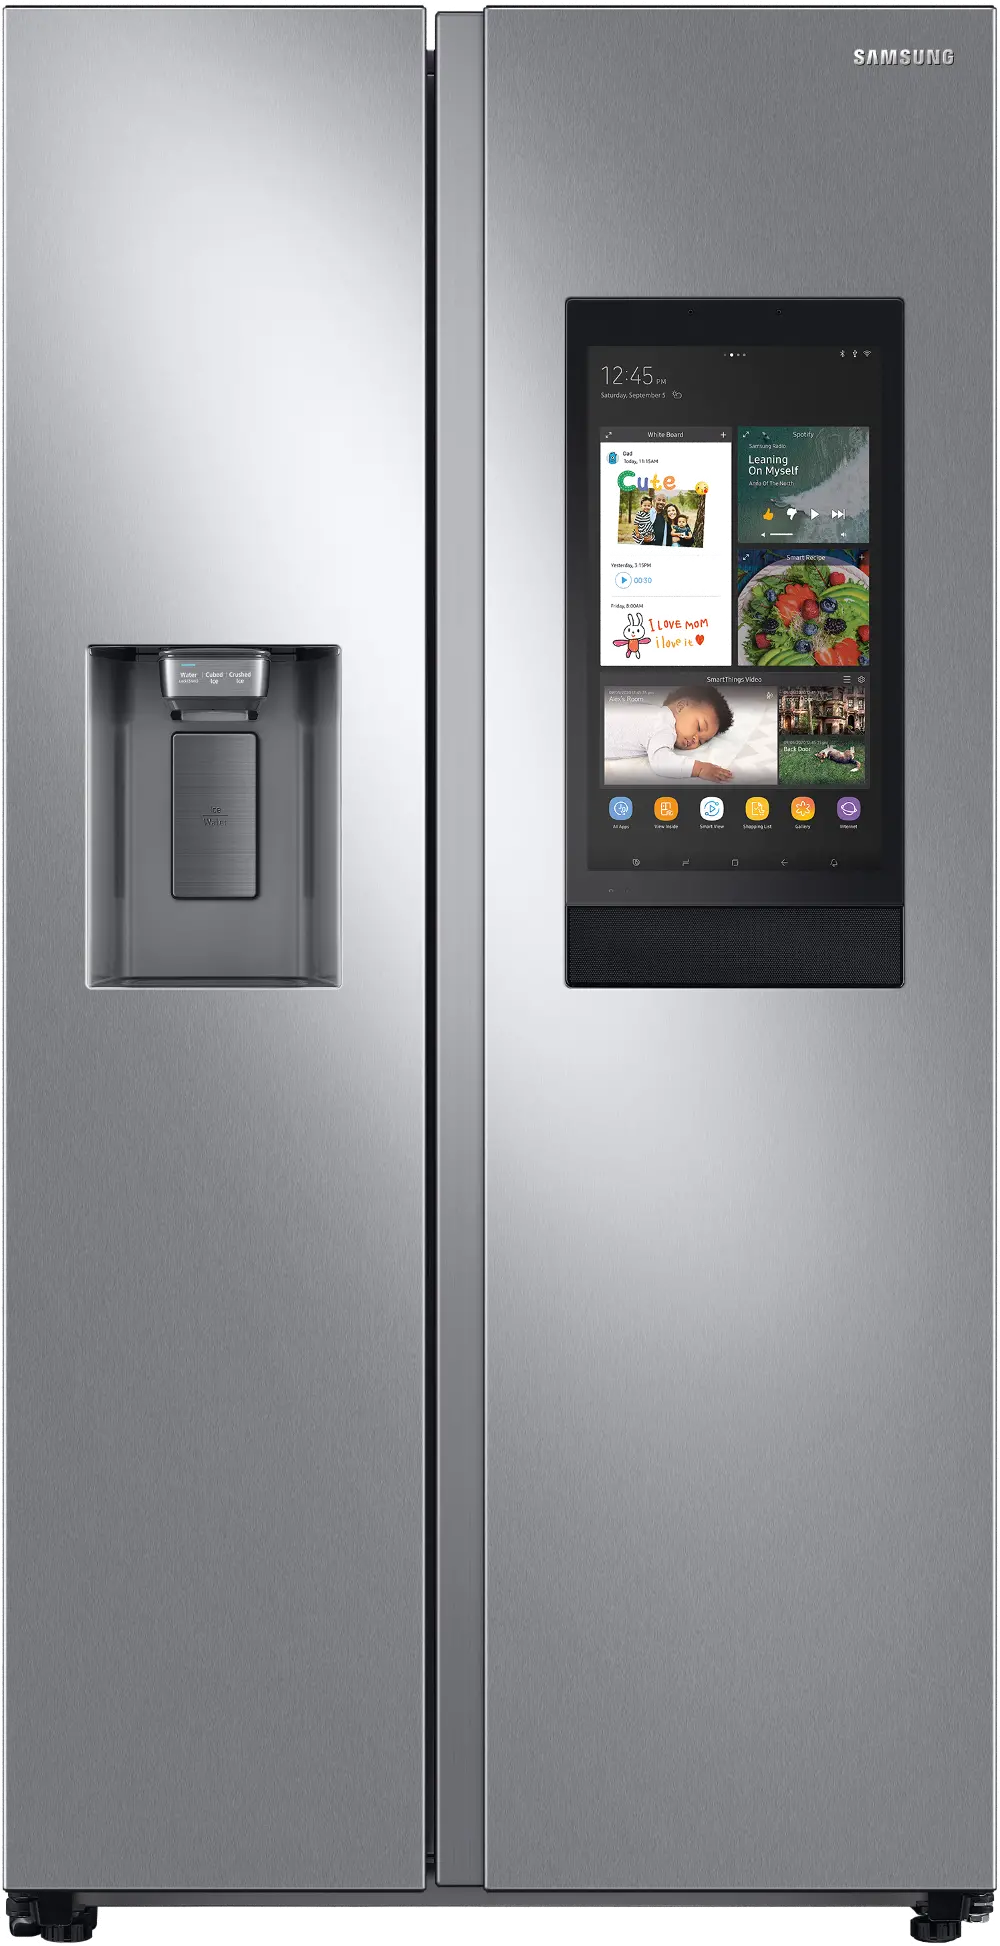 RS22T5561SR Samsung 22.5 cu ft Side by Side Refrigerator - Counter Depth Stainless Steel-1